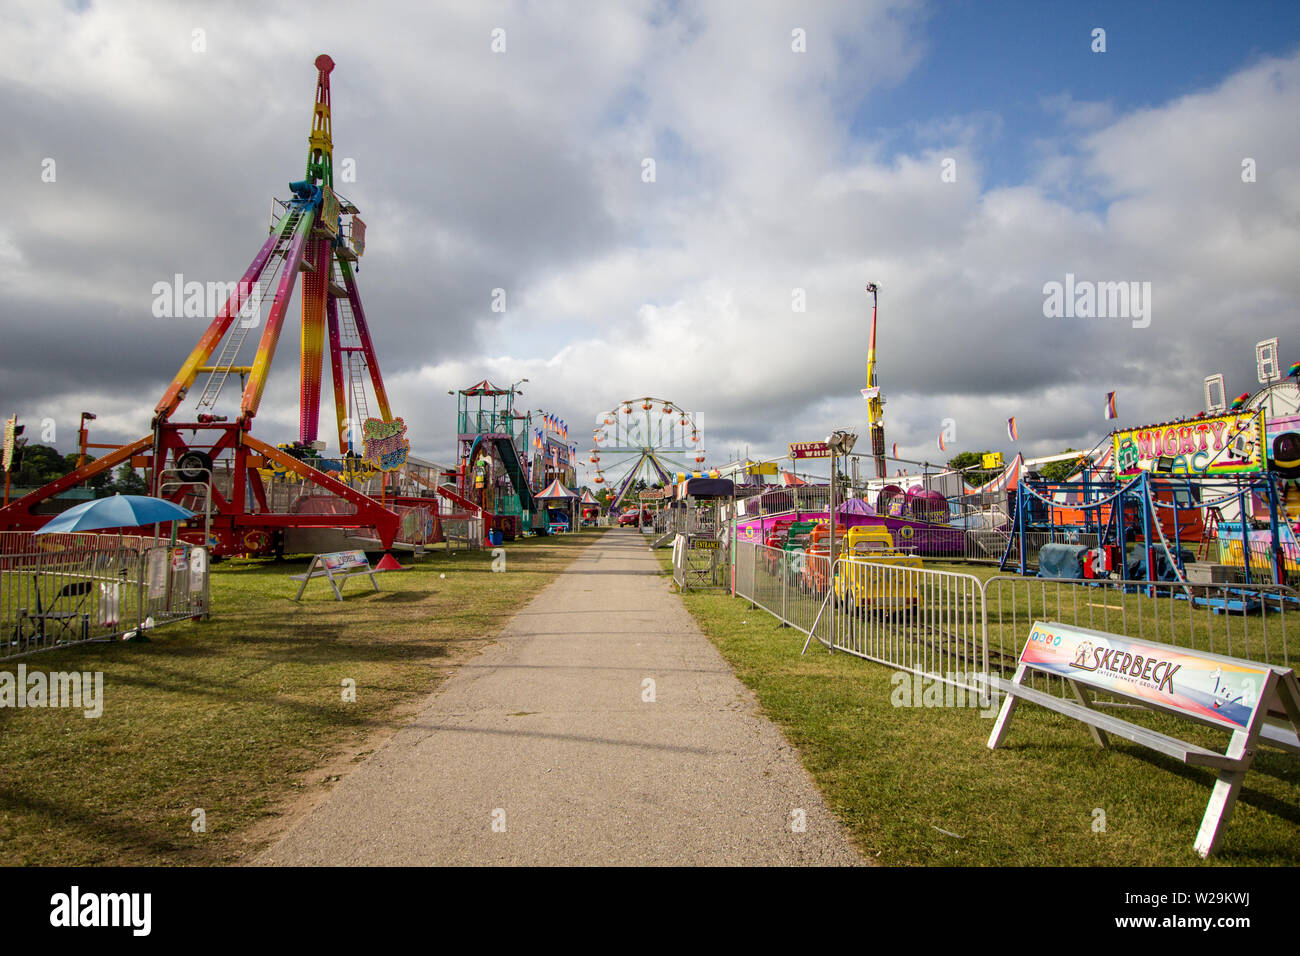 Cheboygan, Michigan, USA - Midway of a county fair during a summer festival in the Midwest United States. Stock Photo